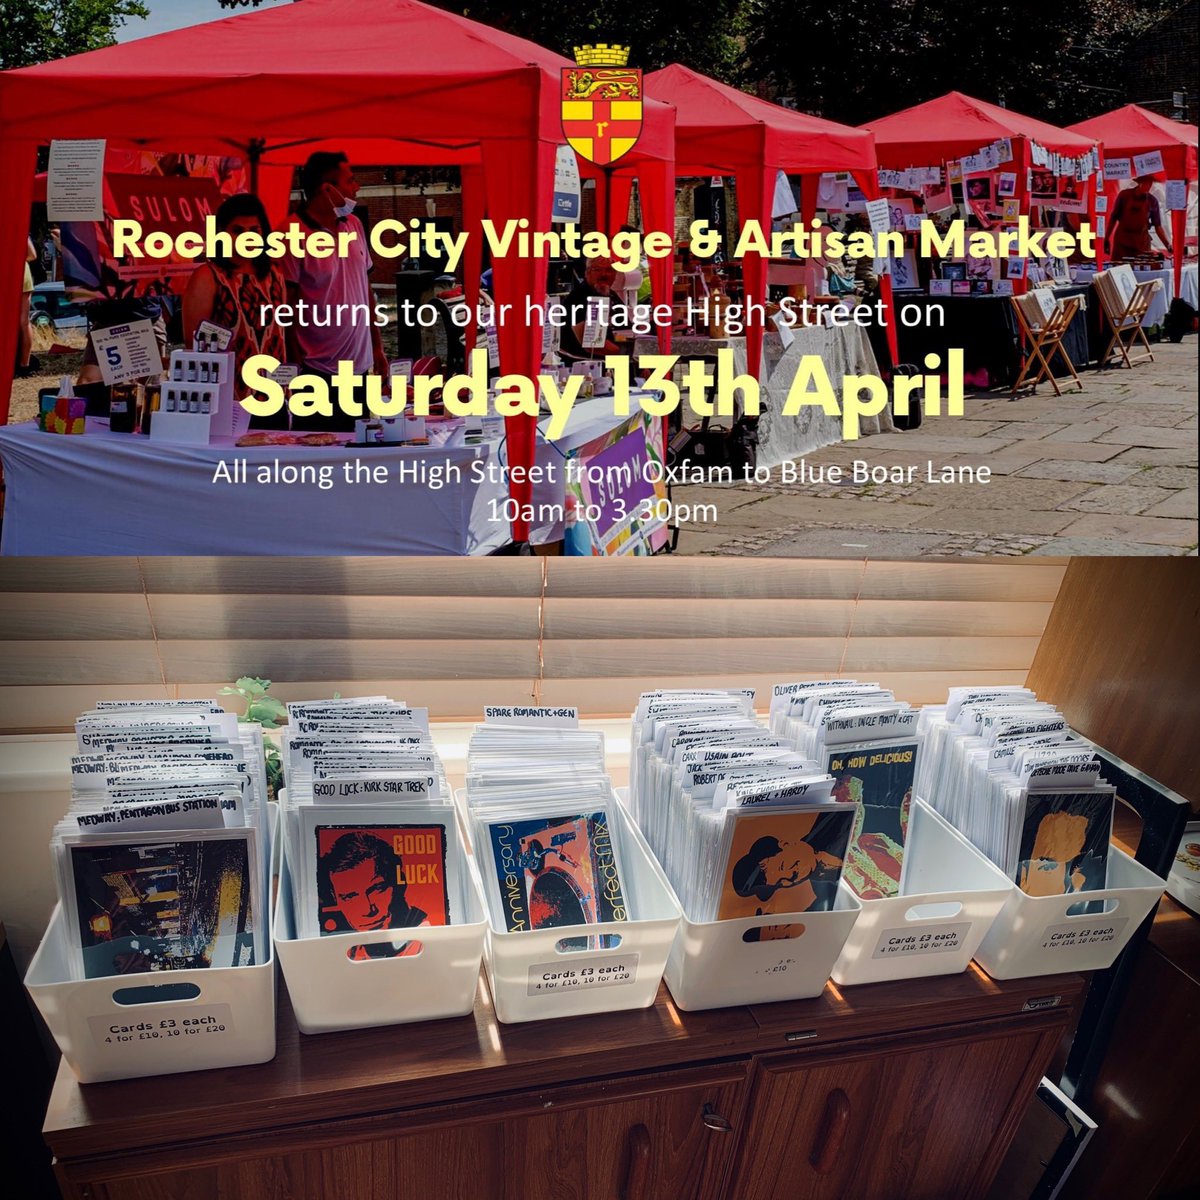 Kind of a #WIP Wednesday as I’m organising my stock ready for Saturday’s (13th) #Rochester #Vintage and #Artisan #Market High St from 10 til 3.30pm. #Cards #signed #art #prints #TShirts and whatever else I can fit in my Skoda. See you there. #supportsmallbusiness #Medway #wallart